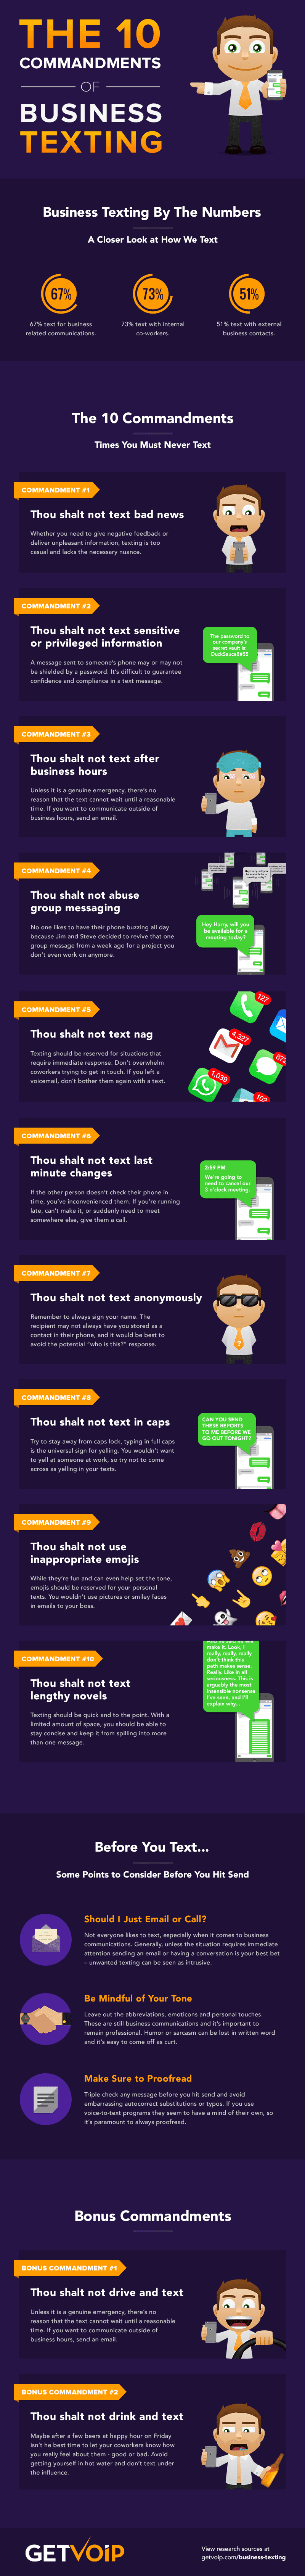 The 10 Commandments of Business Texting